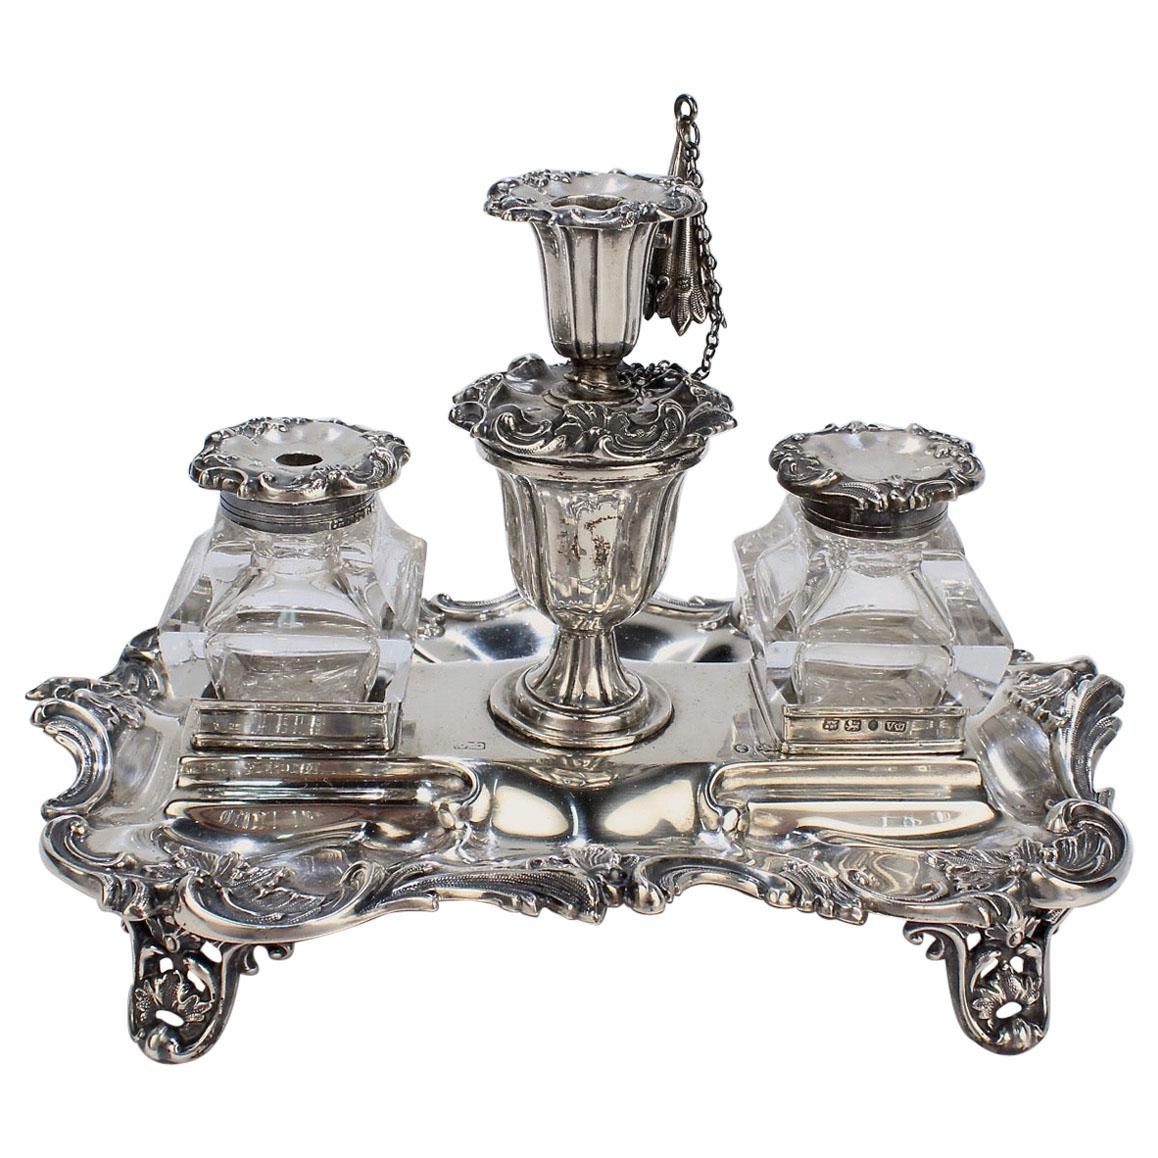 Exceptional Early Victorian English Sterling Silver Inkstand by Henry Wilkinson For Sale